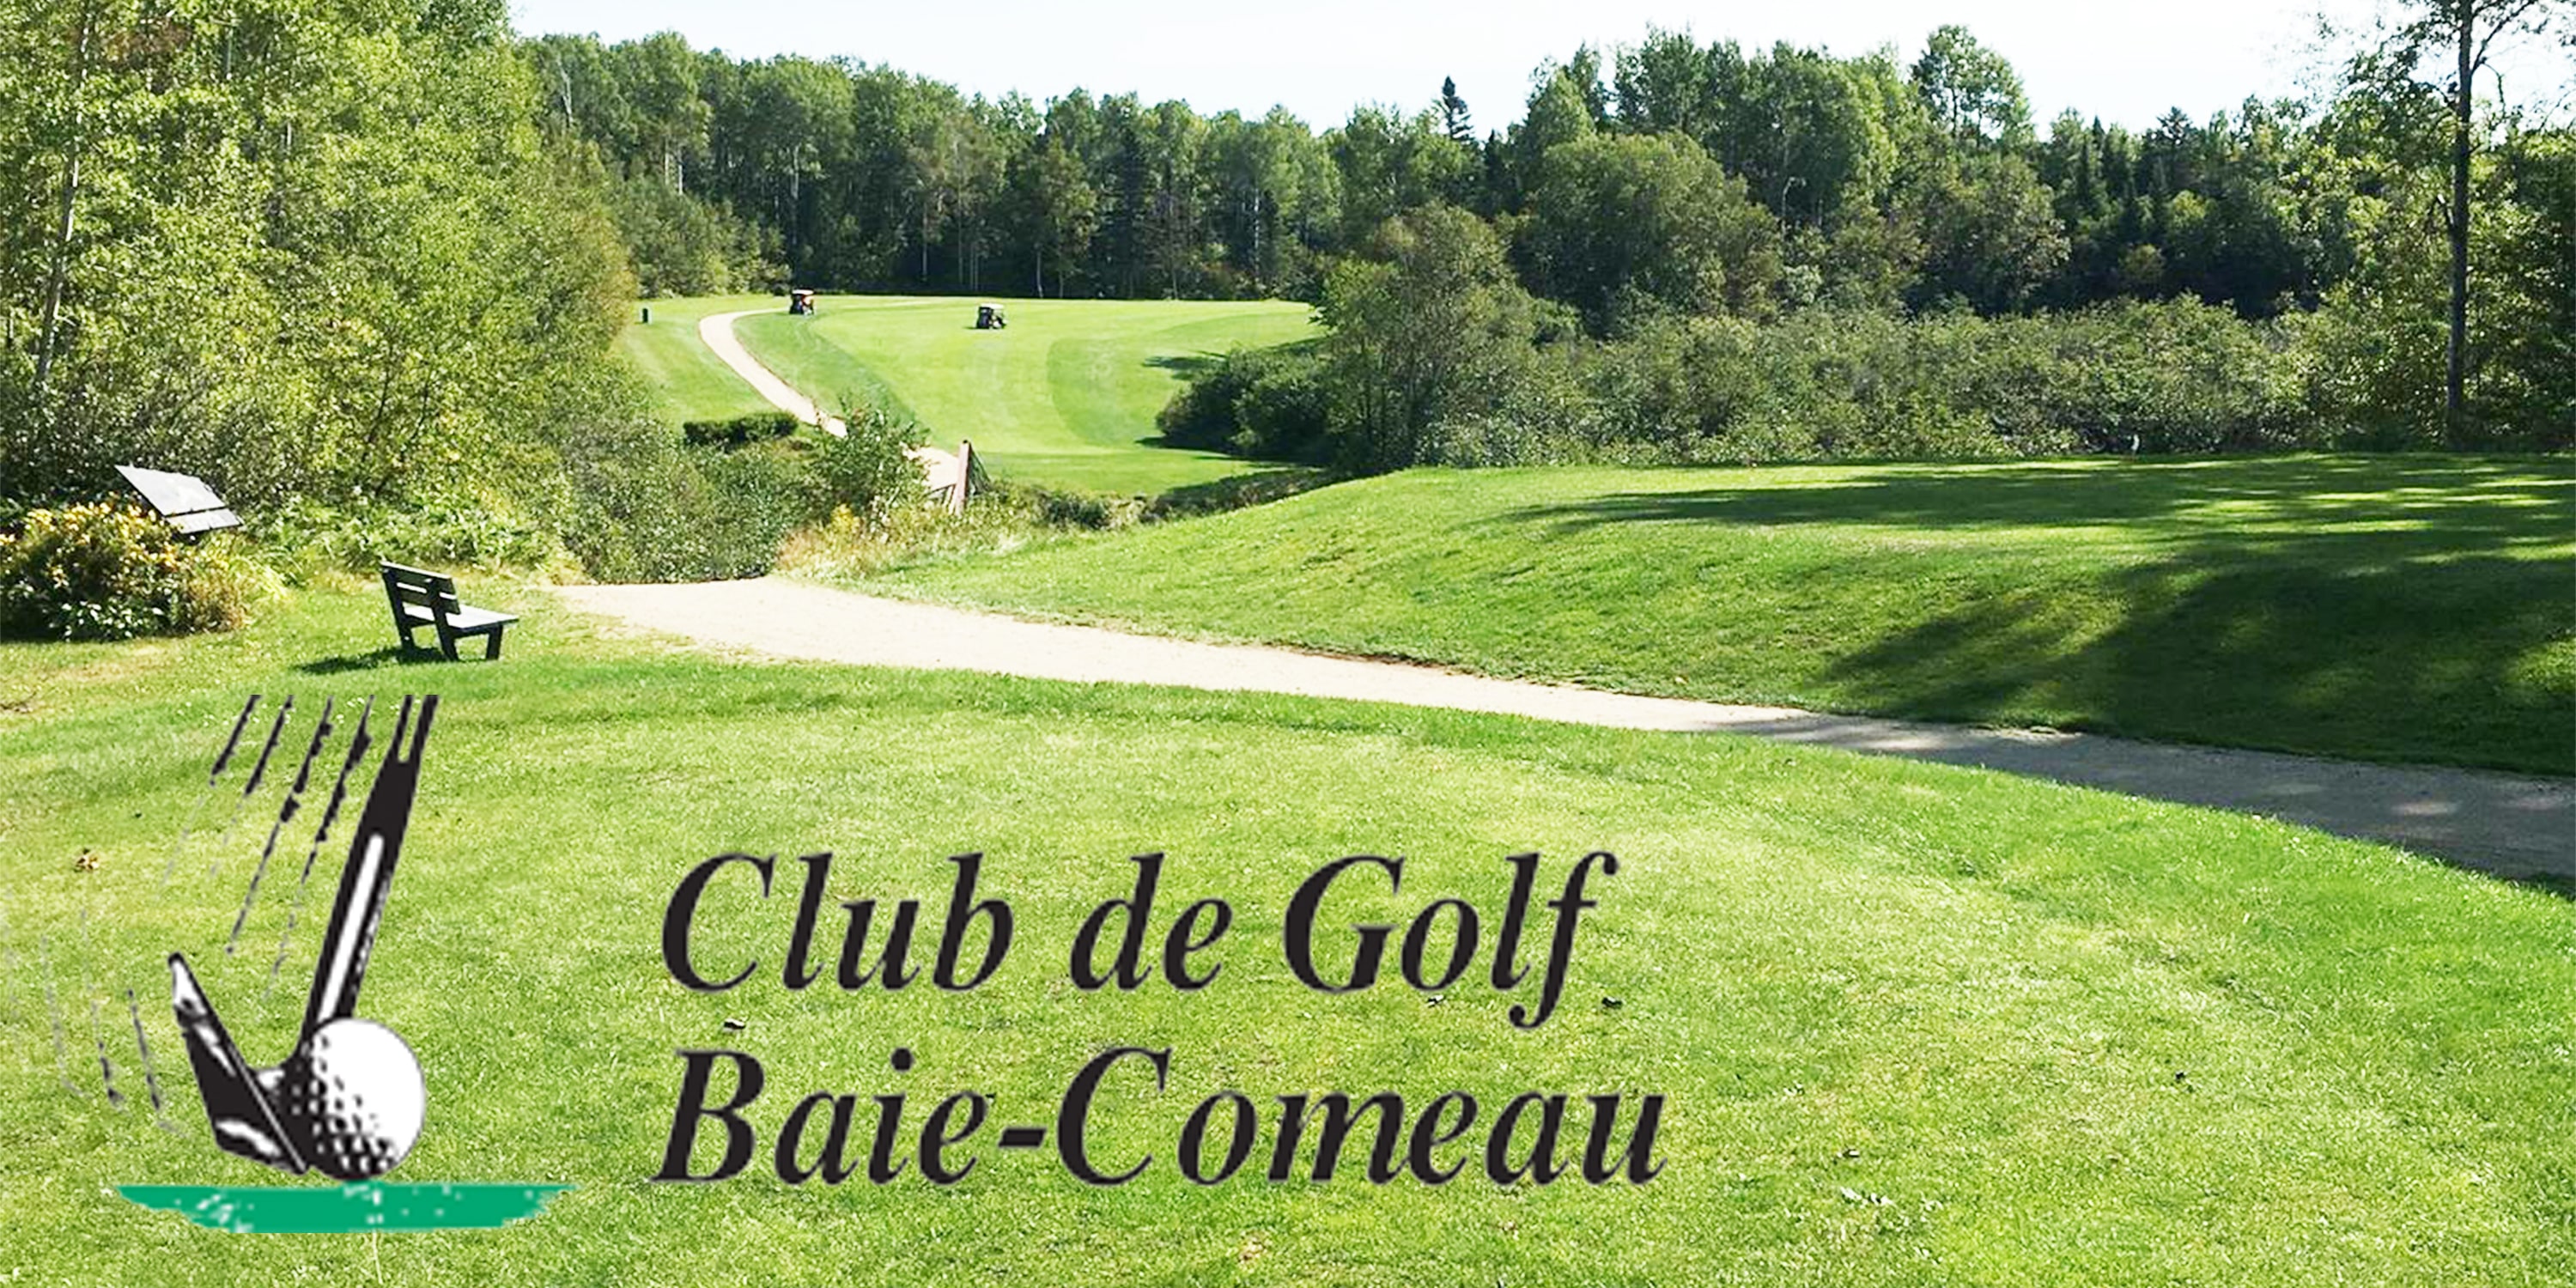 Club de Golf Baie-Comeau - A Challenge For All Golfers | golf tee time reservation software